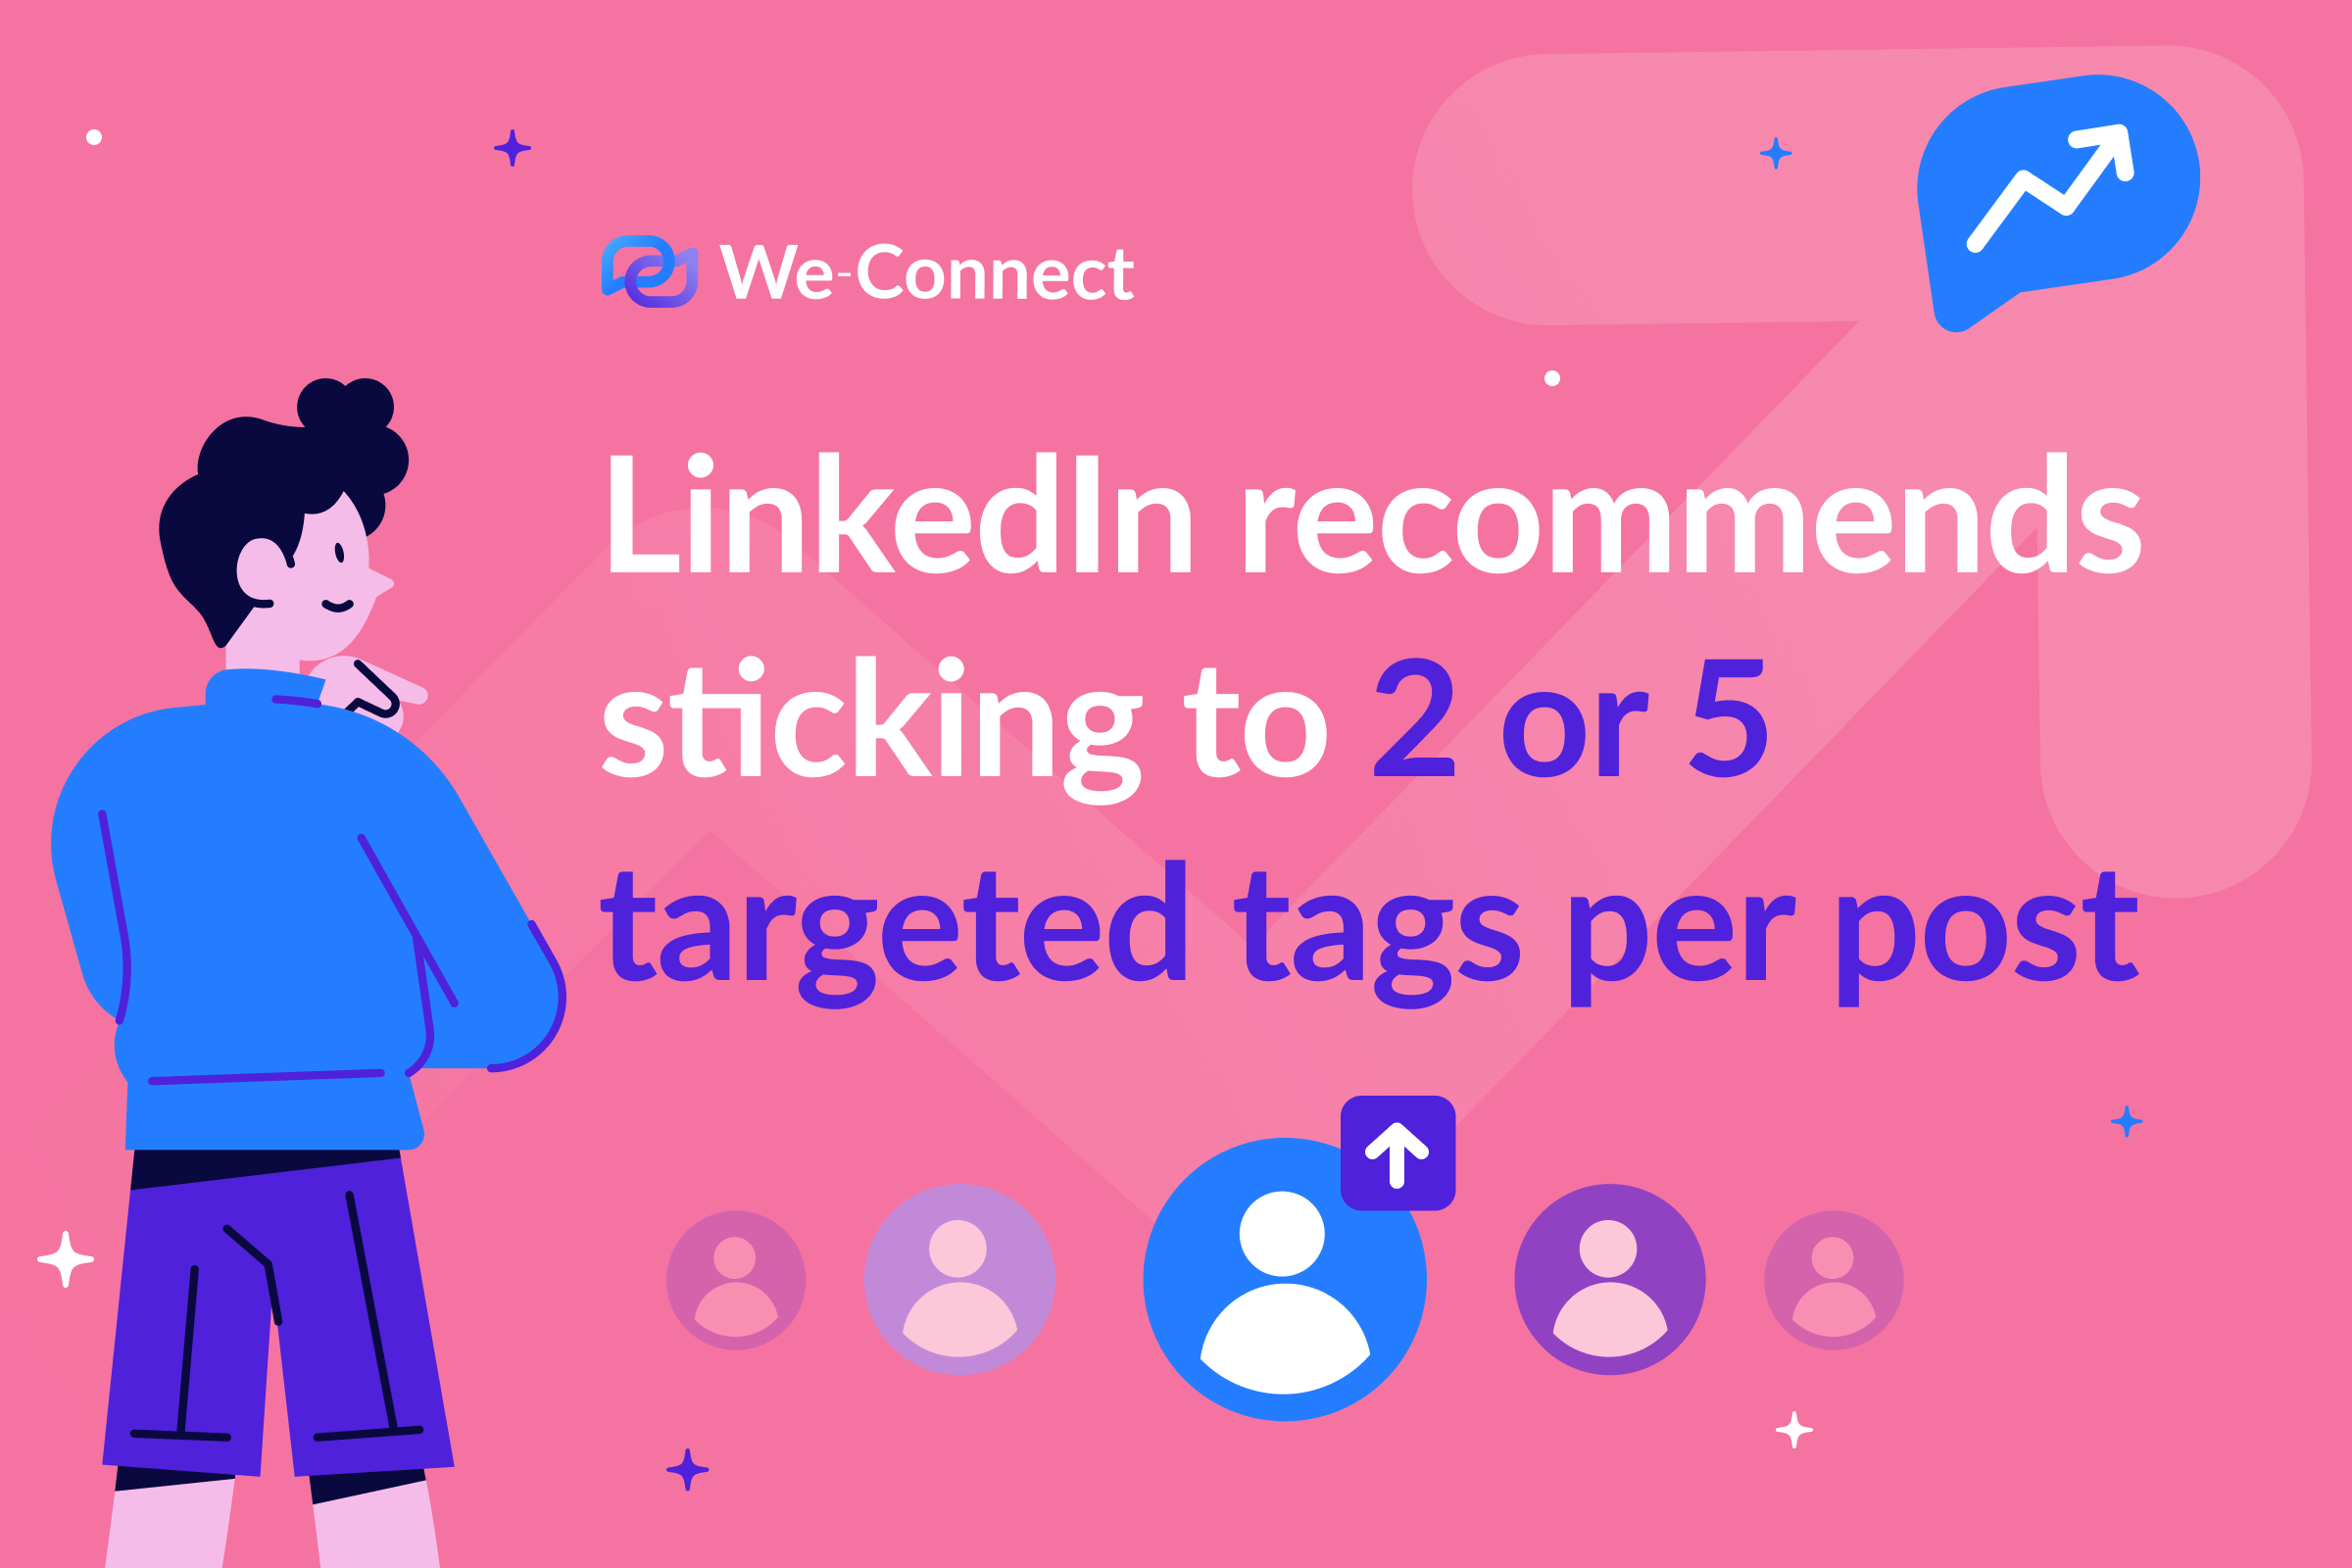 LinkedIn recommend sticking to 2 or 5 hashtags per post